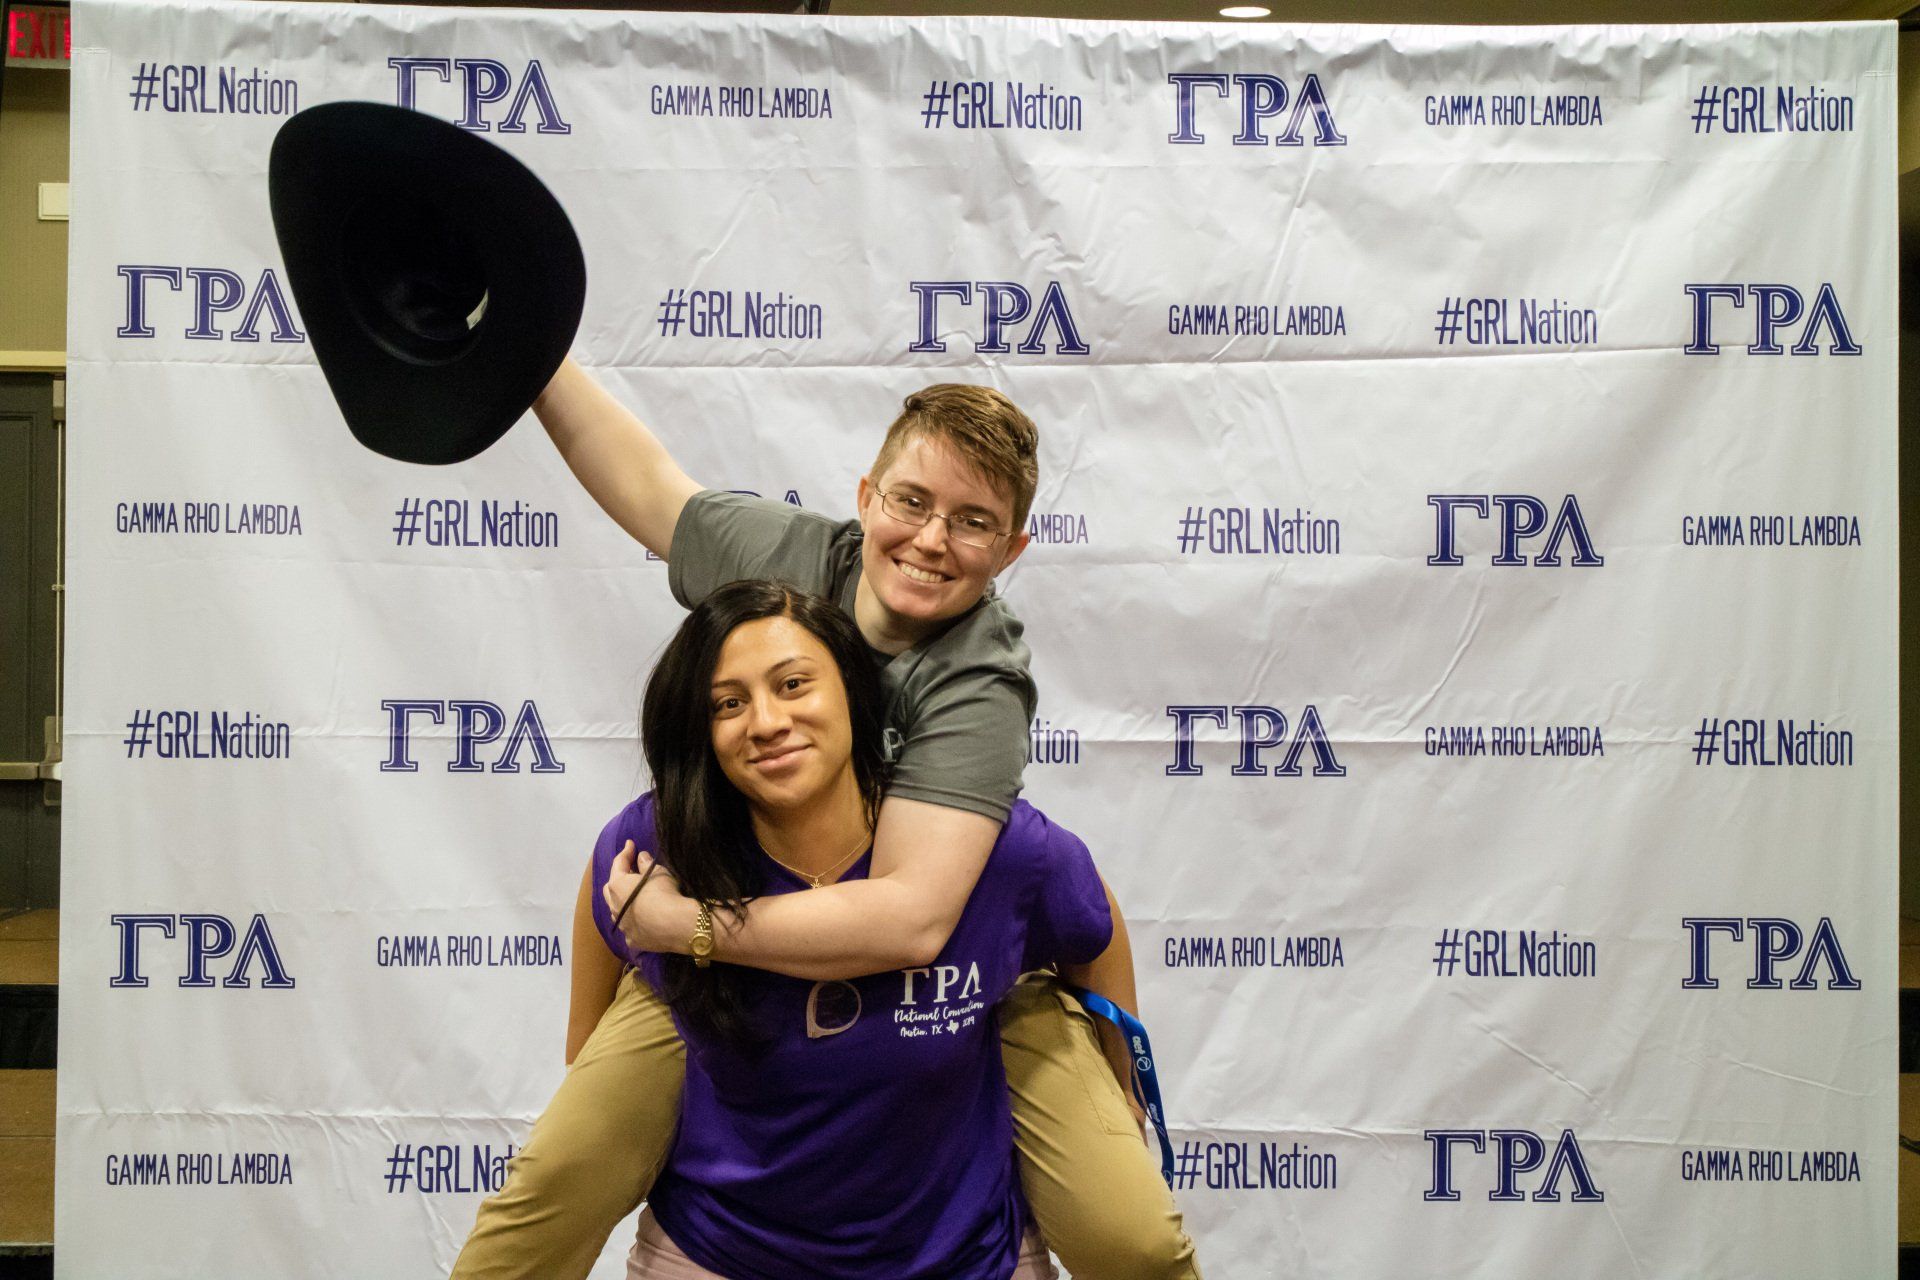 Two people pose together. One person is on the other's back and is holding out a cowboy hat